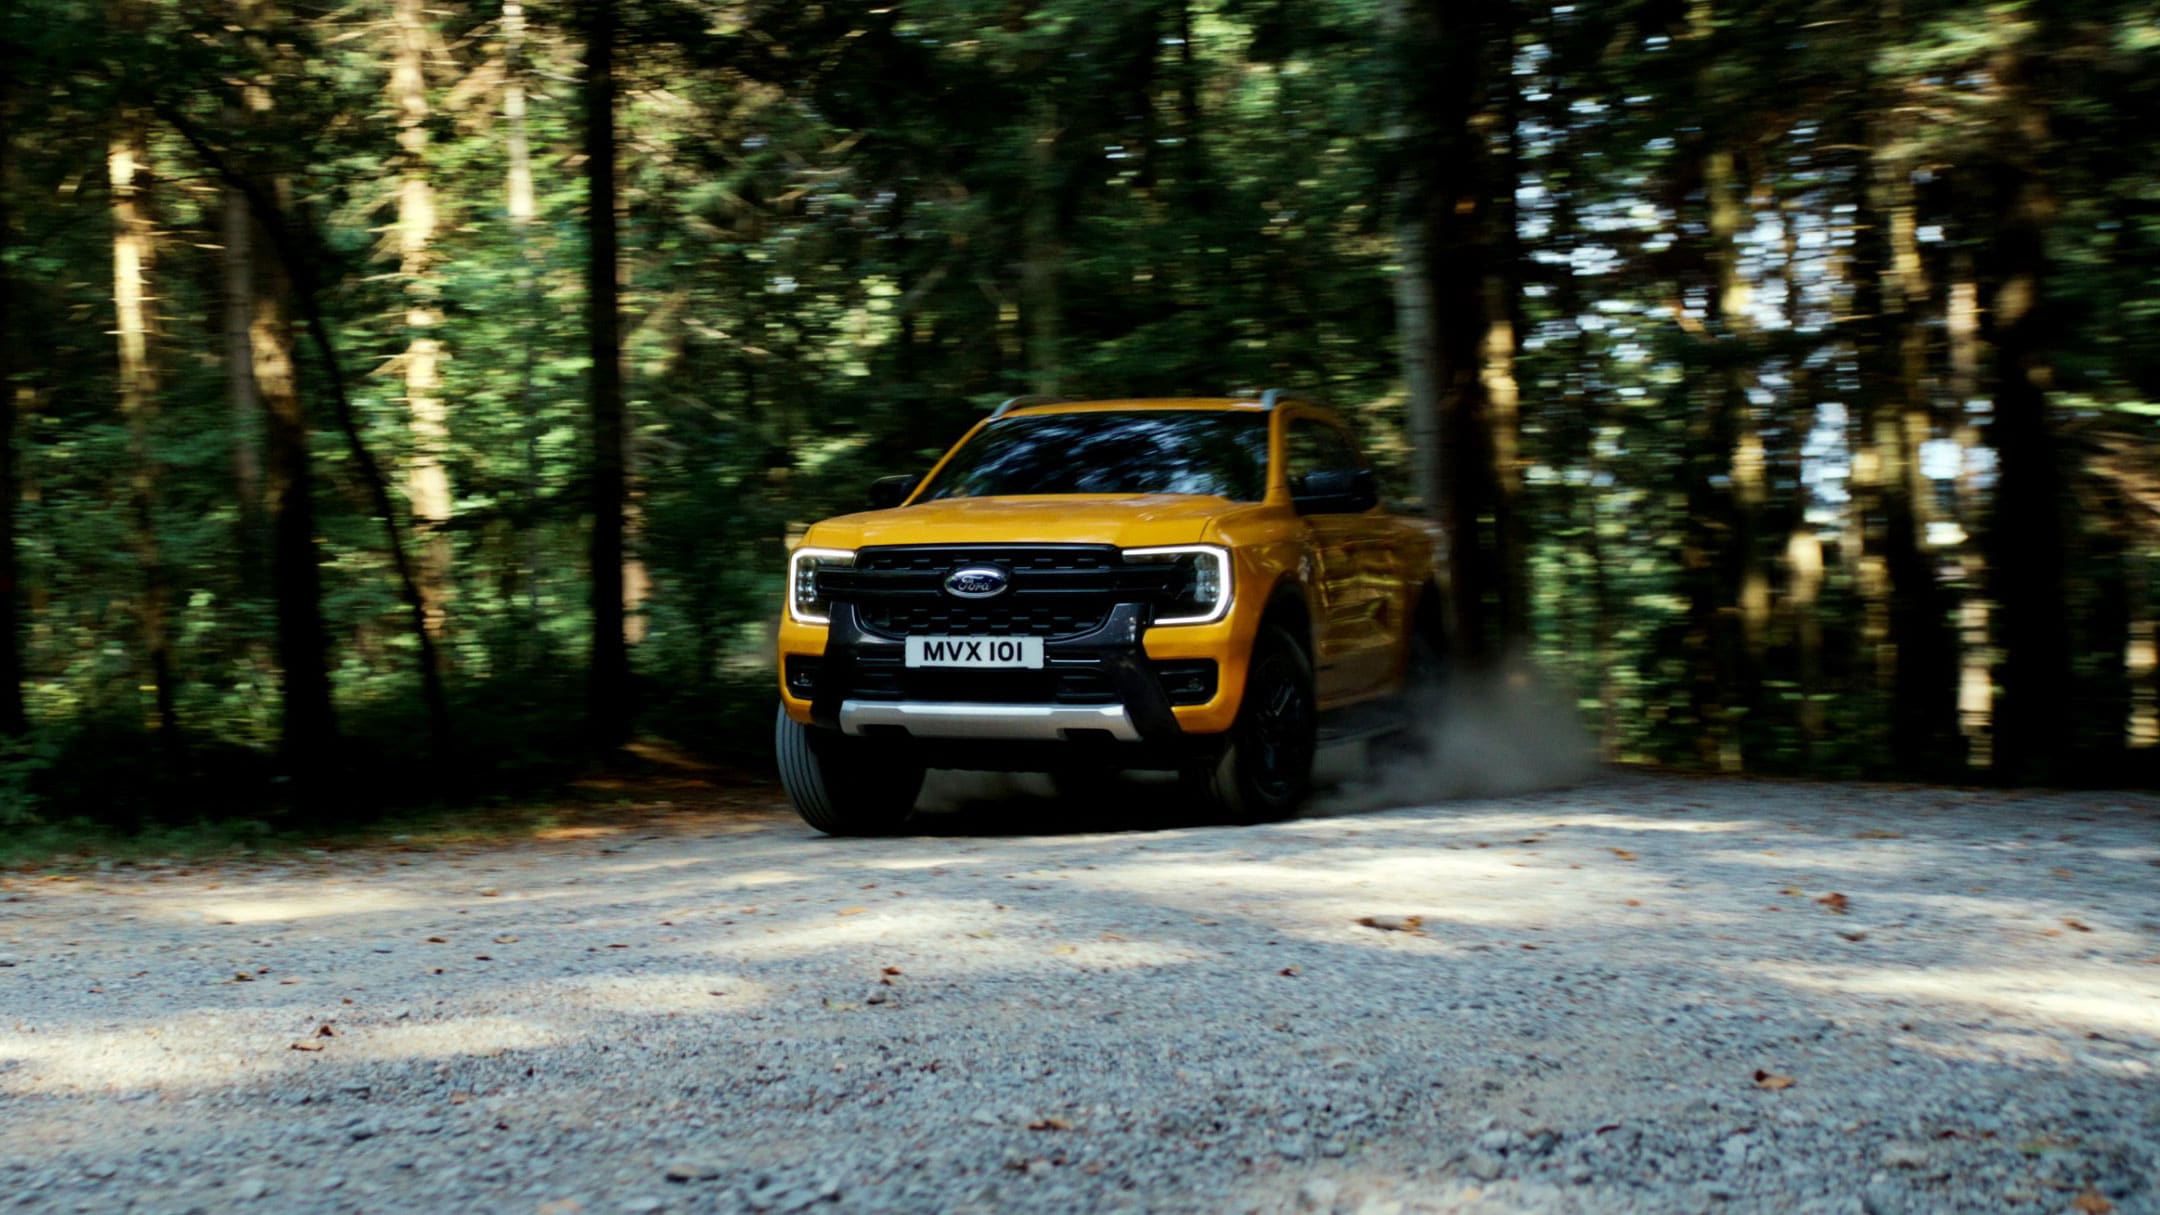 Ford Ranger emerging from the forest